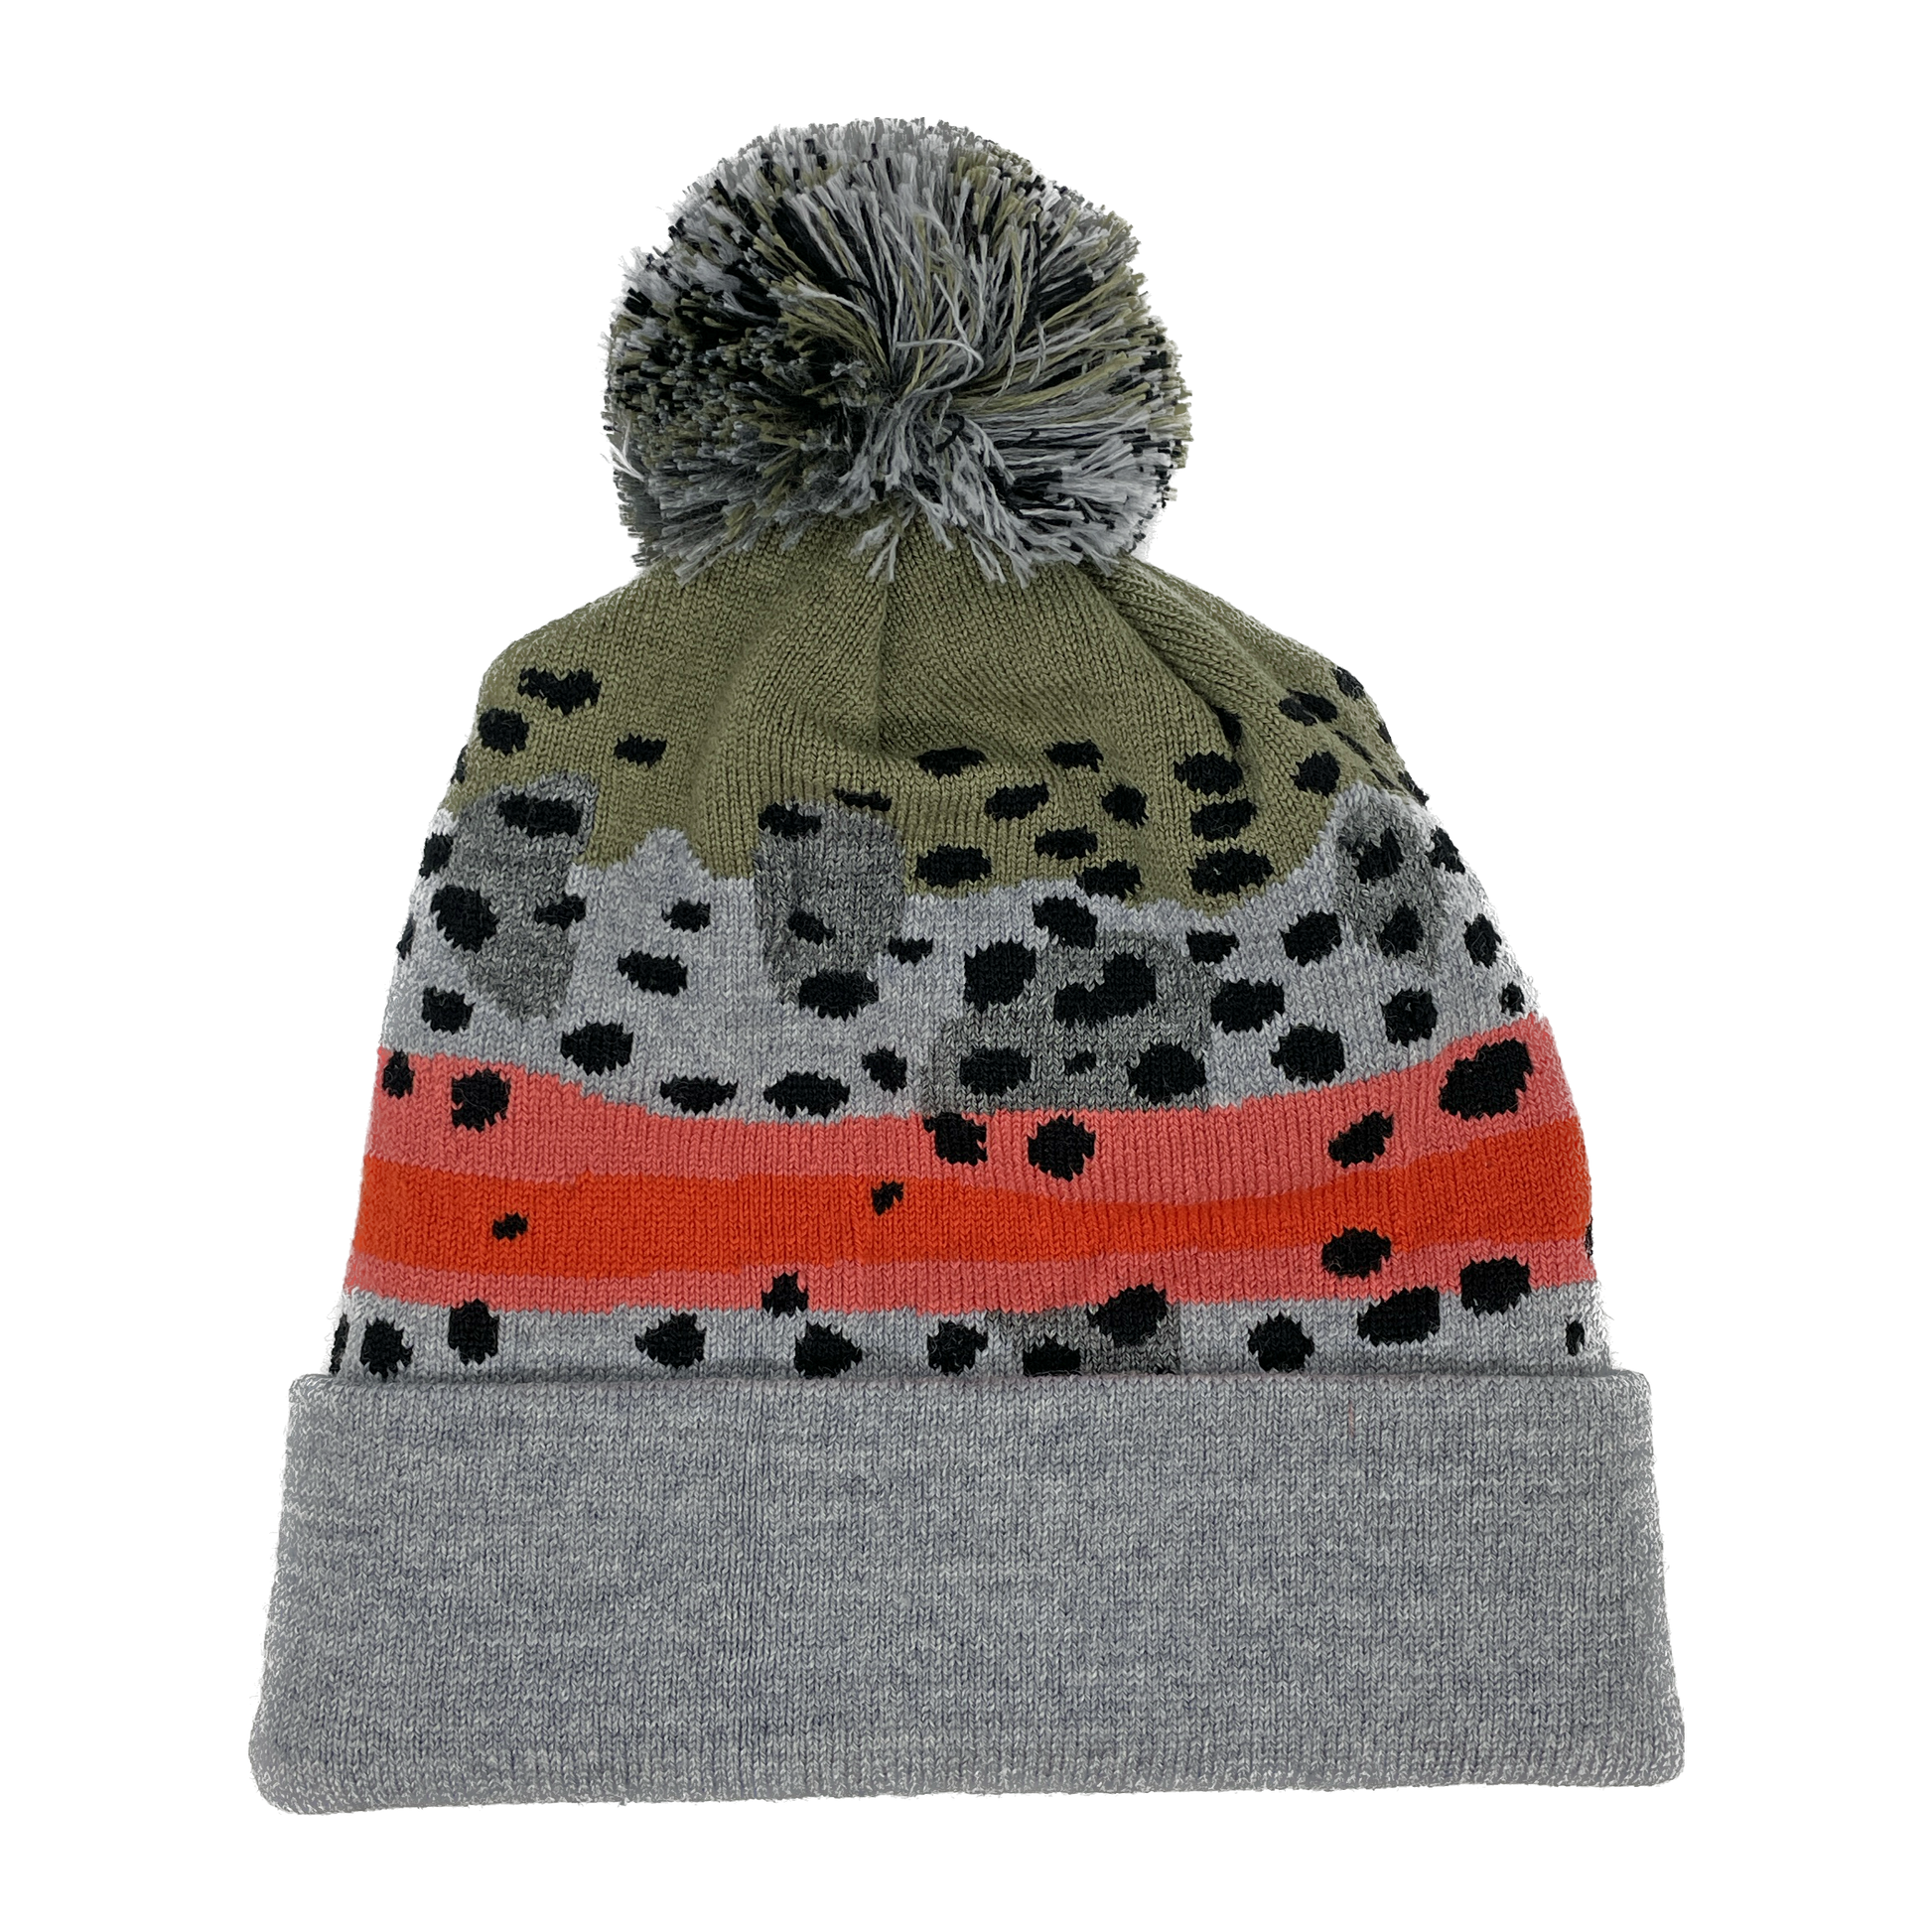 A winter hat imitating rainbow trout skin with a gray and green poof on top and a light grey cuff